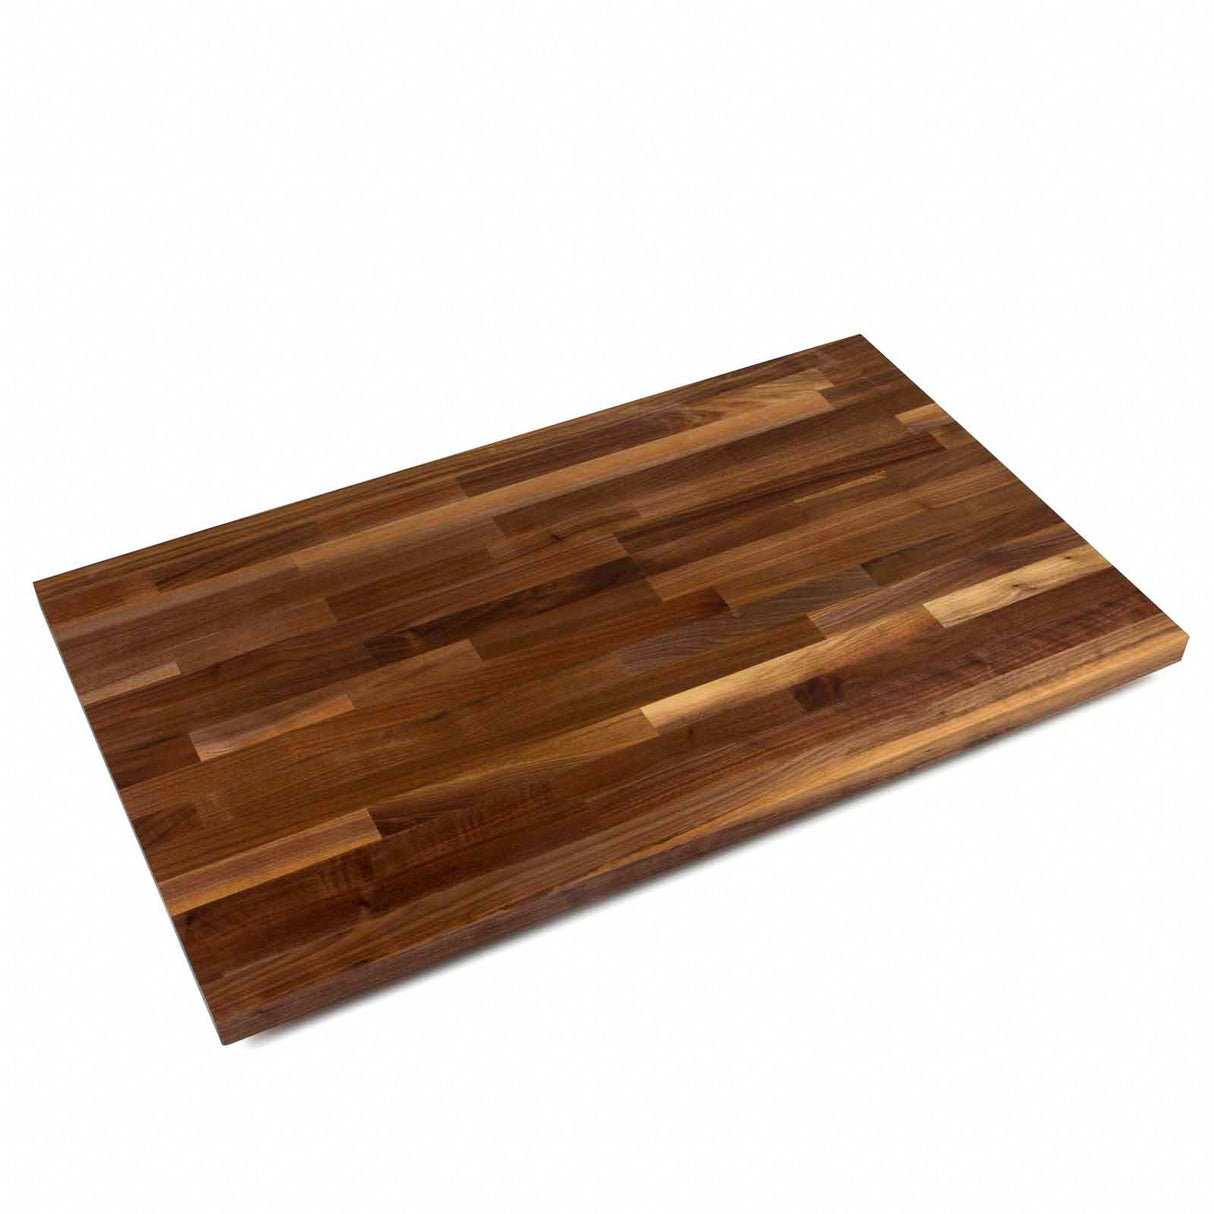 John Boos WALKCT-BL10925-O Blended Walnut 25 Wide Kitchen Counter Top, 1-1/2 Thick, 109 x 25, Oil Finish